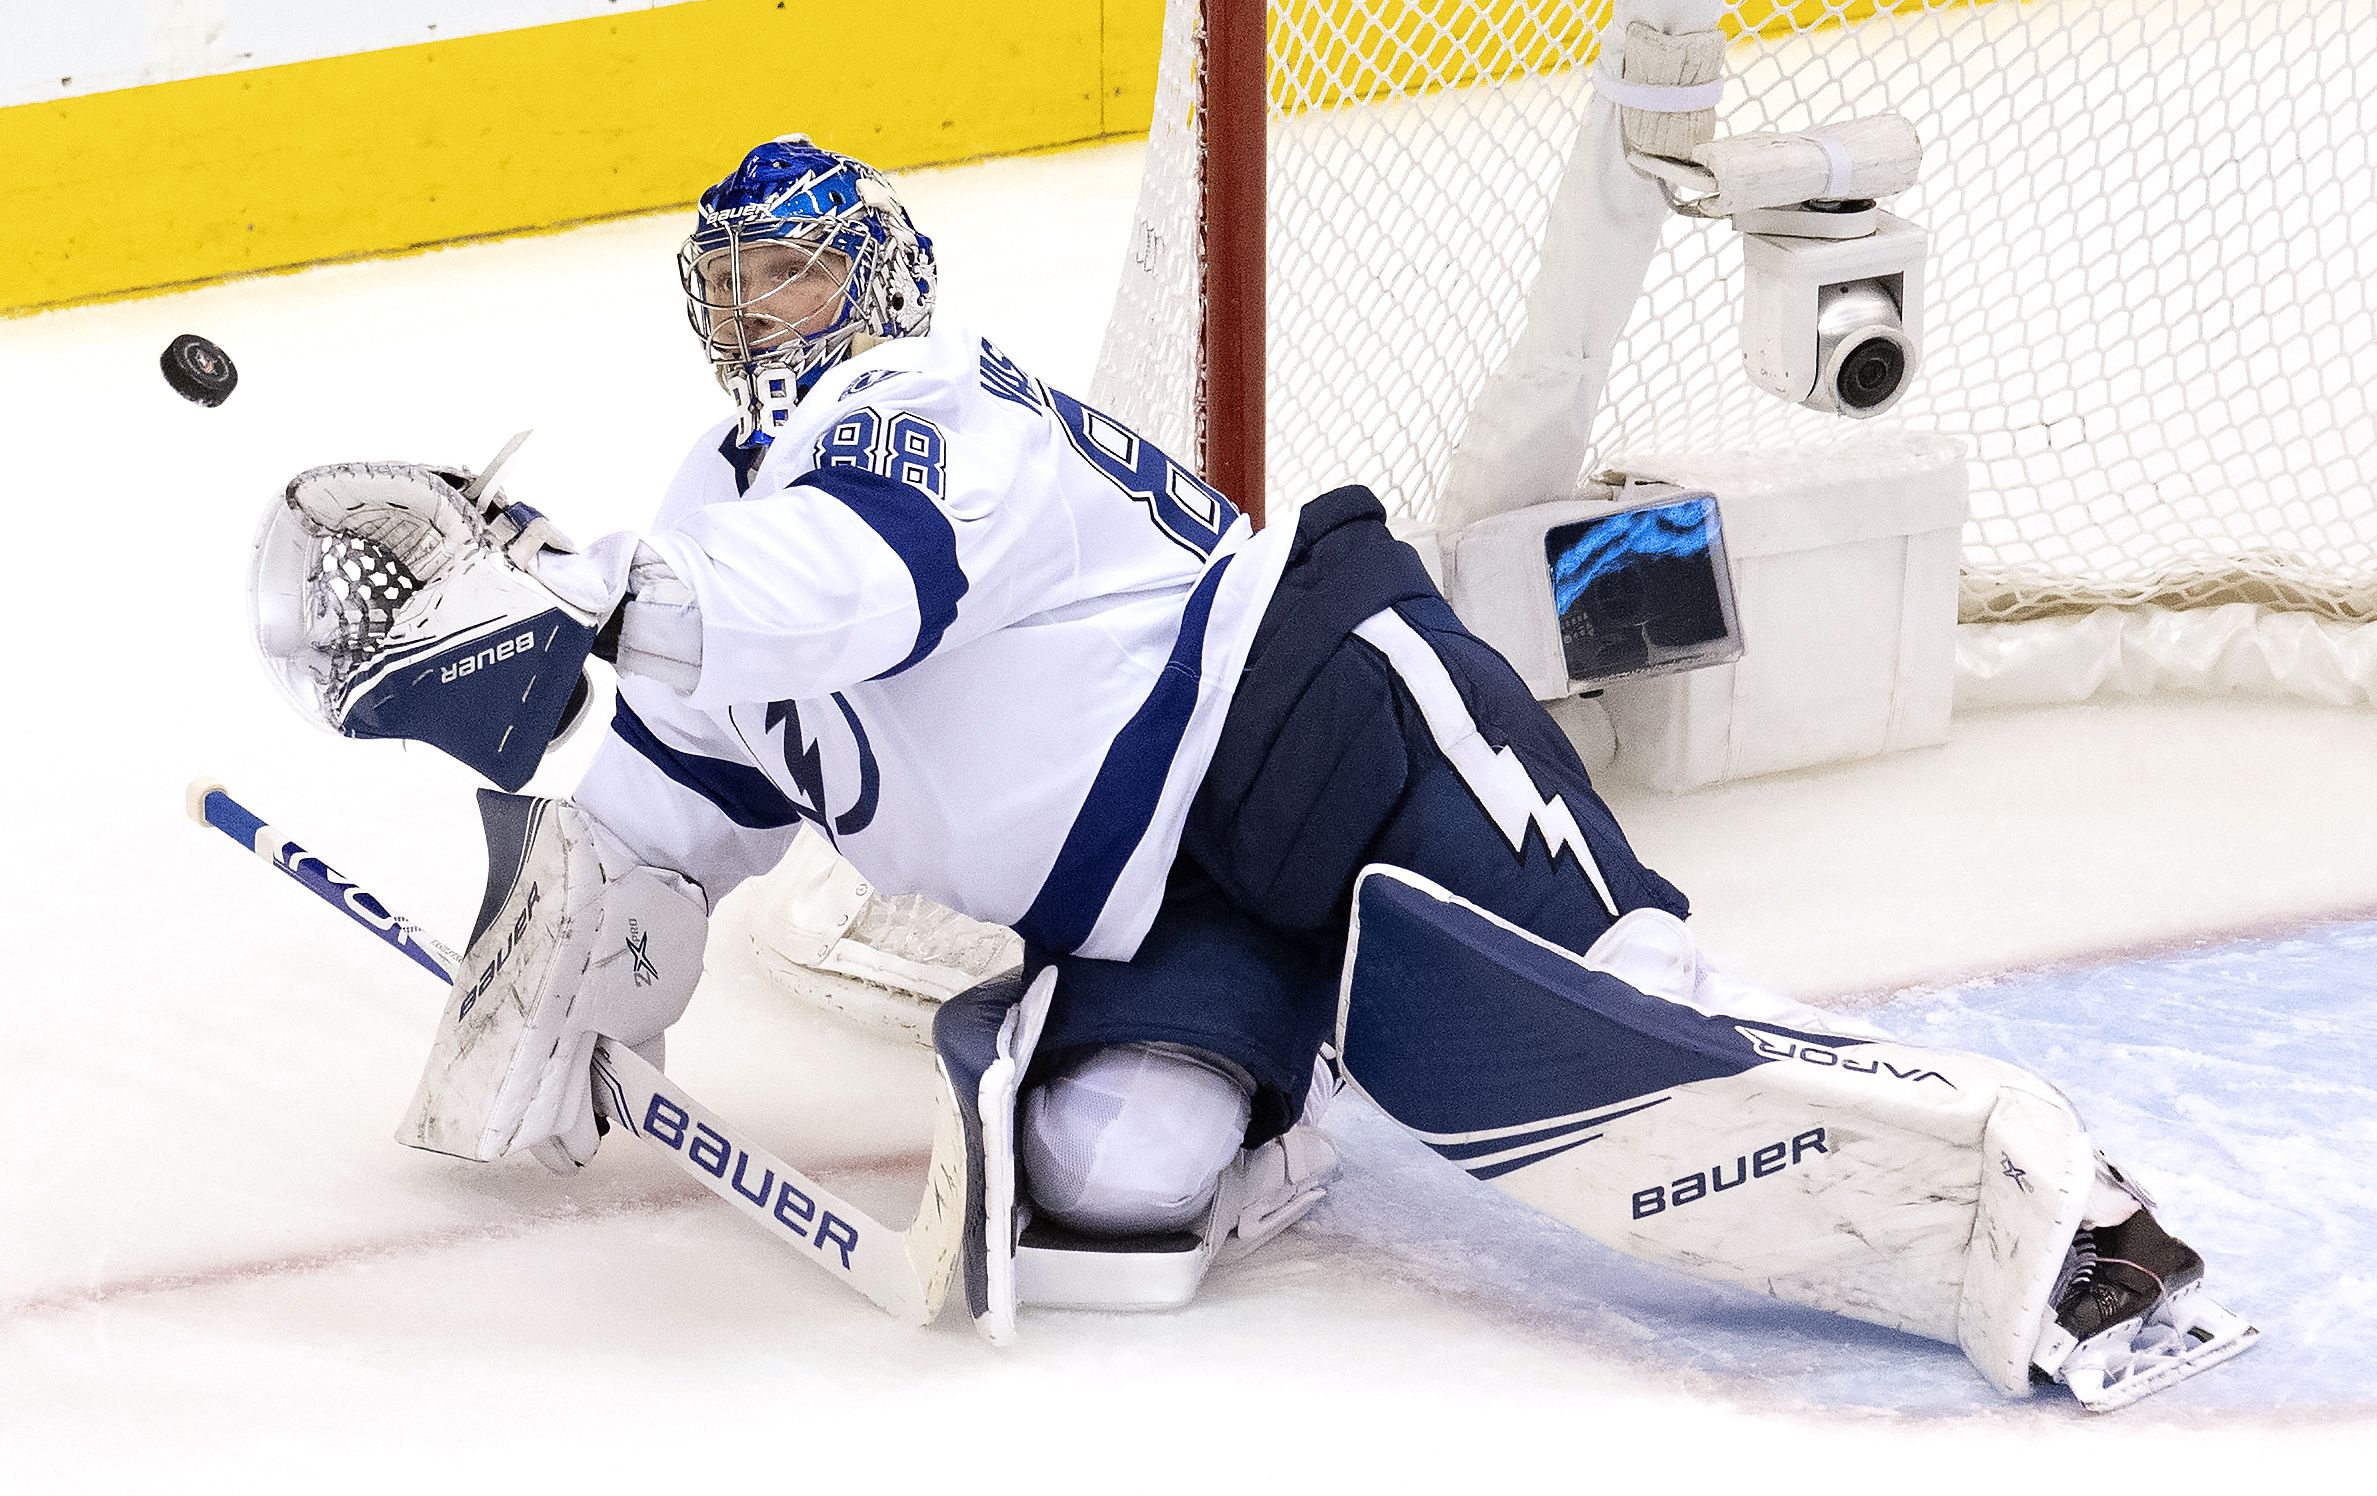 No Vasilevskiy at practice, an interesting replacement and an